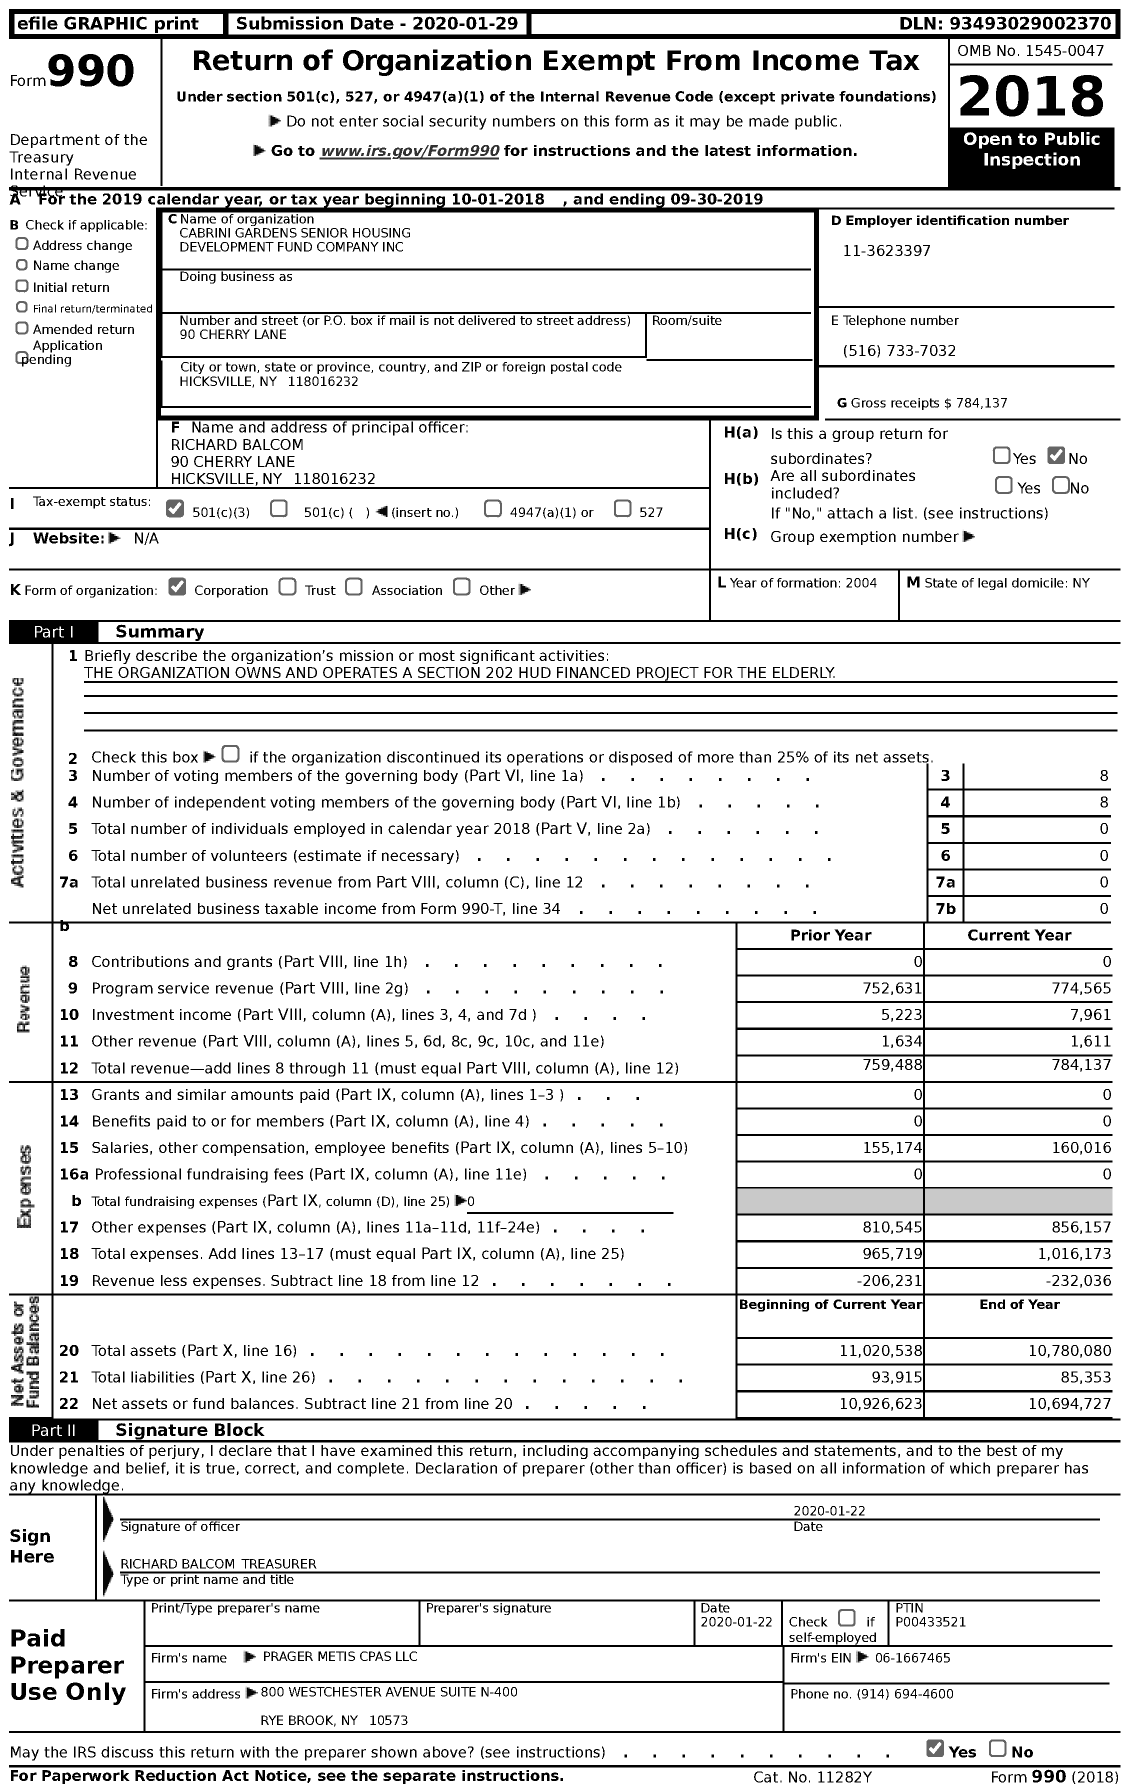 Image of first page of 2018 Form 990 for Cabrini Gardens Senior Housing Development Fund Company